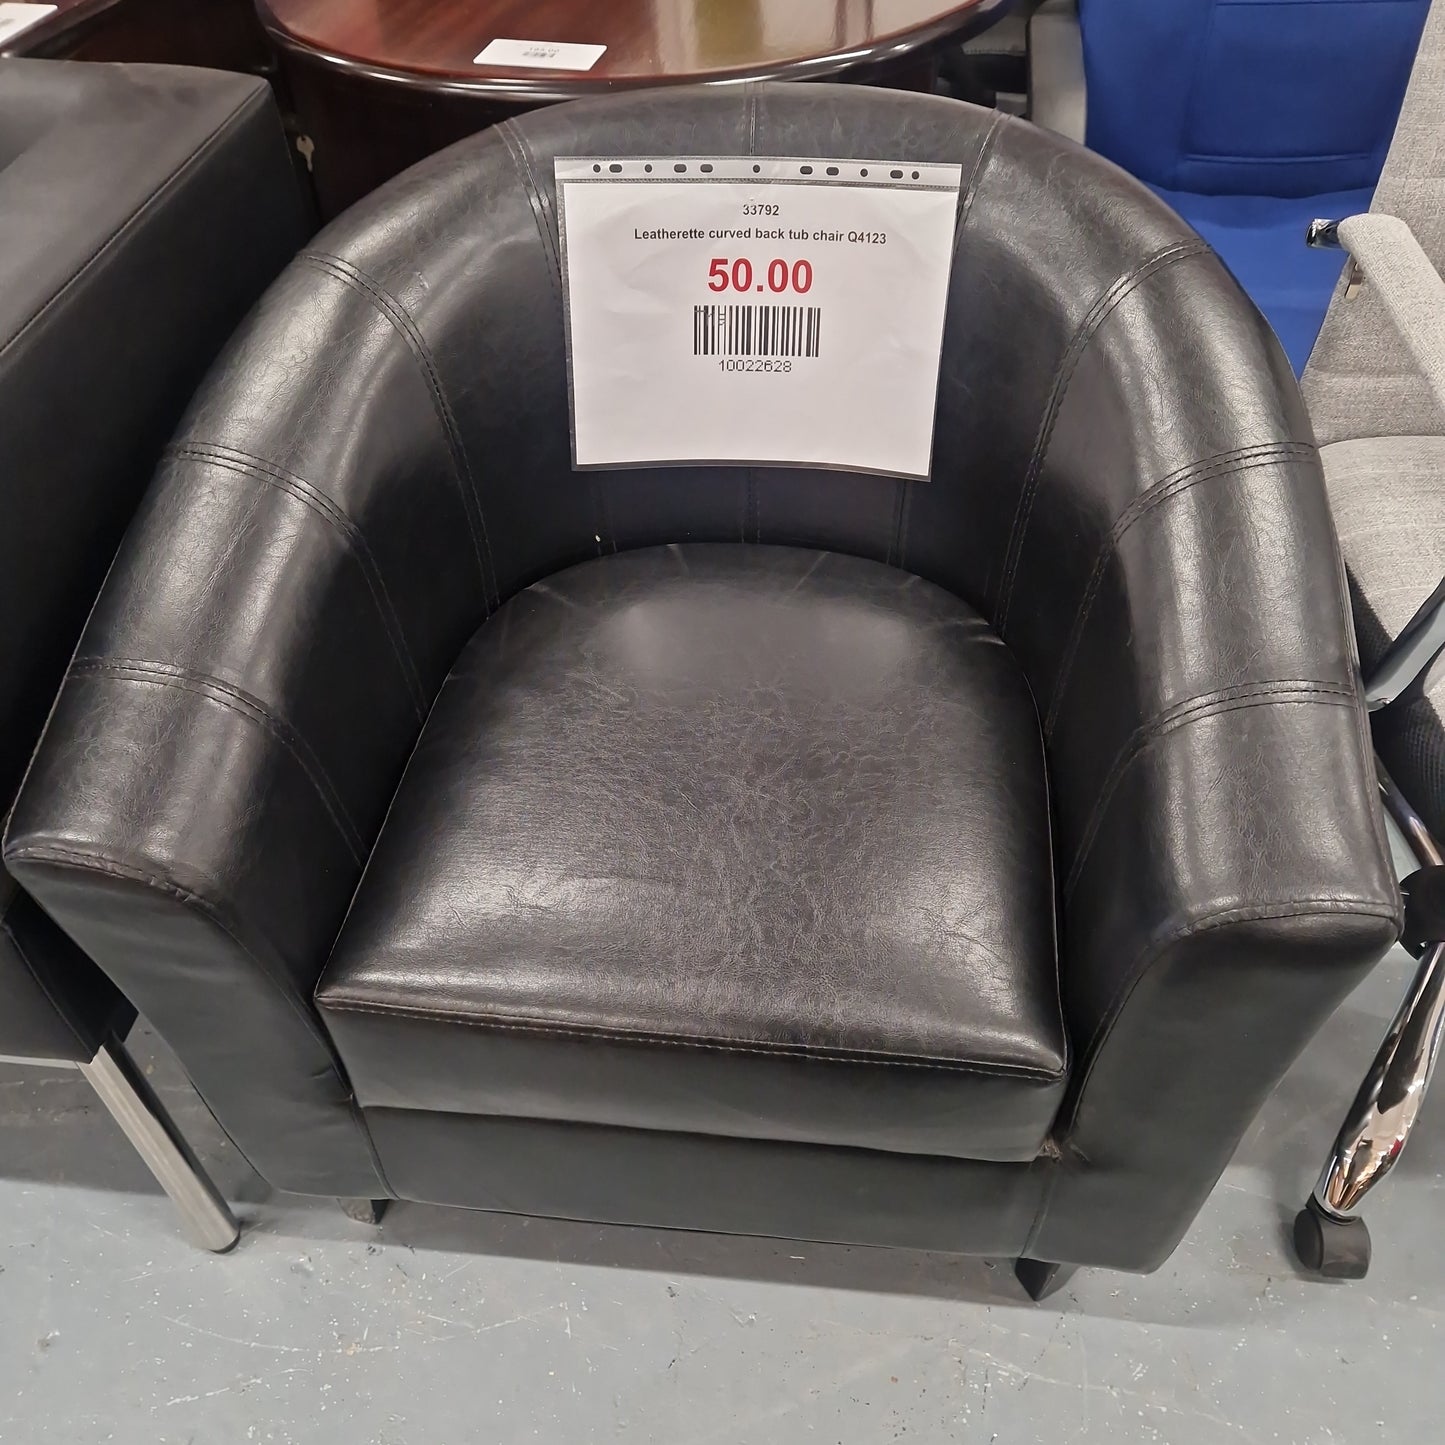 Leatherette curved back tub chair